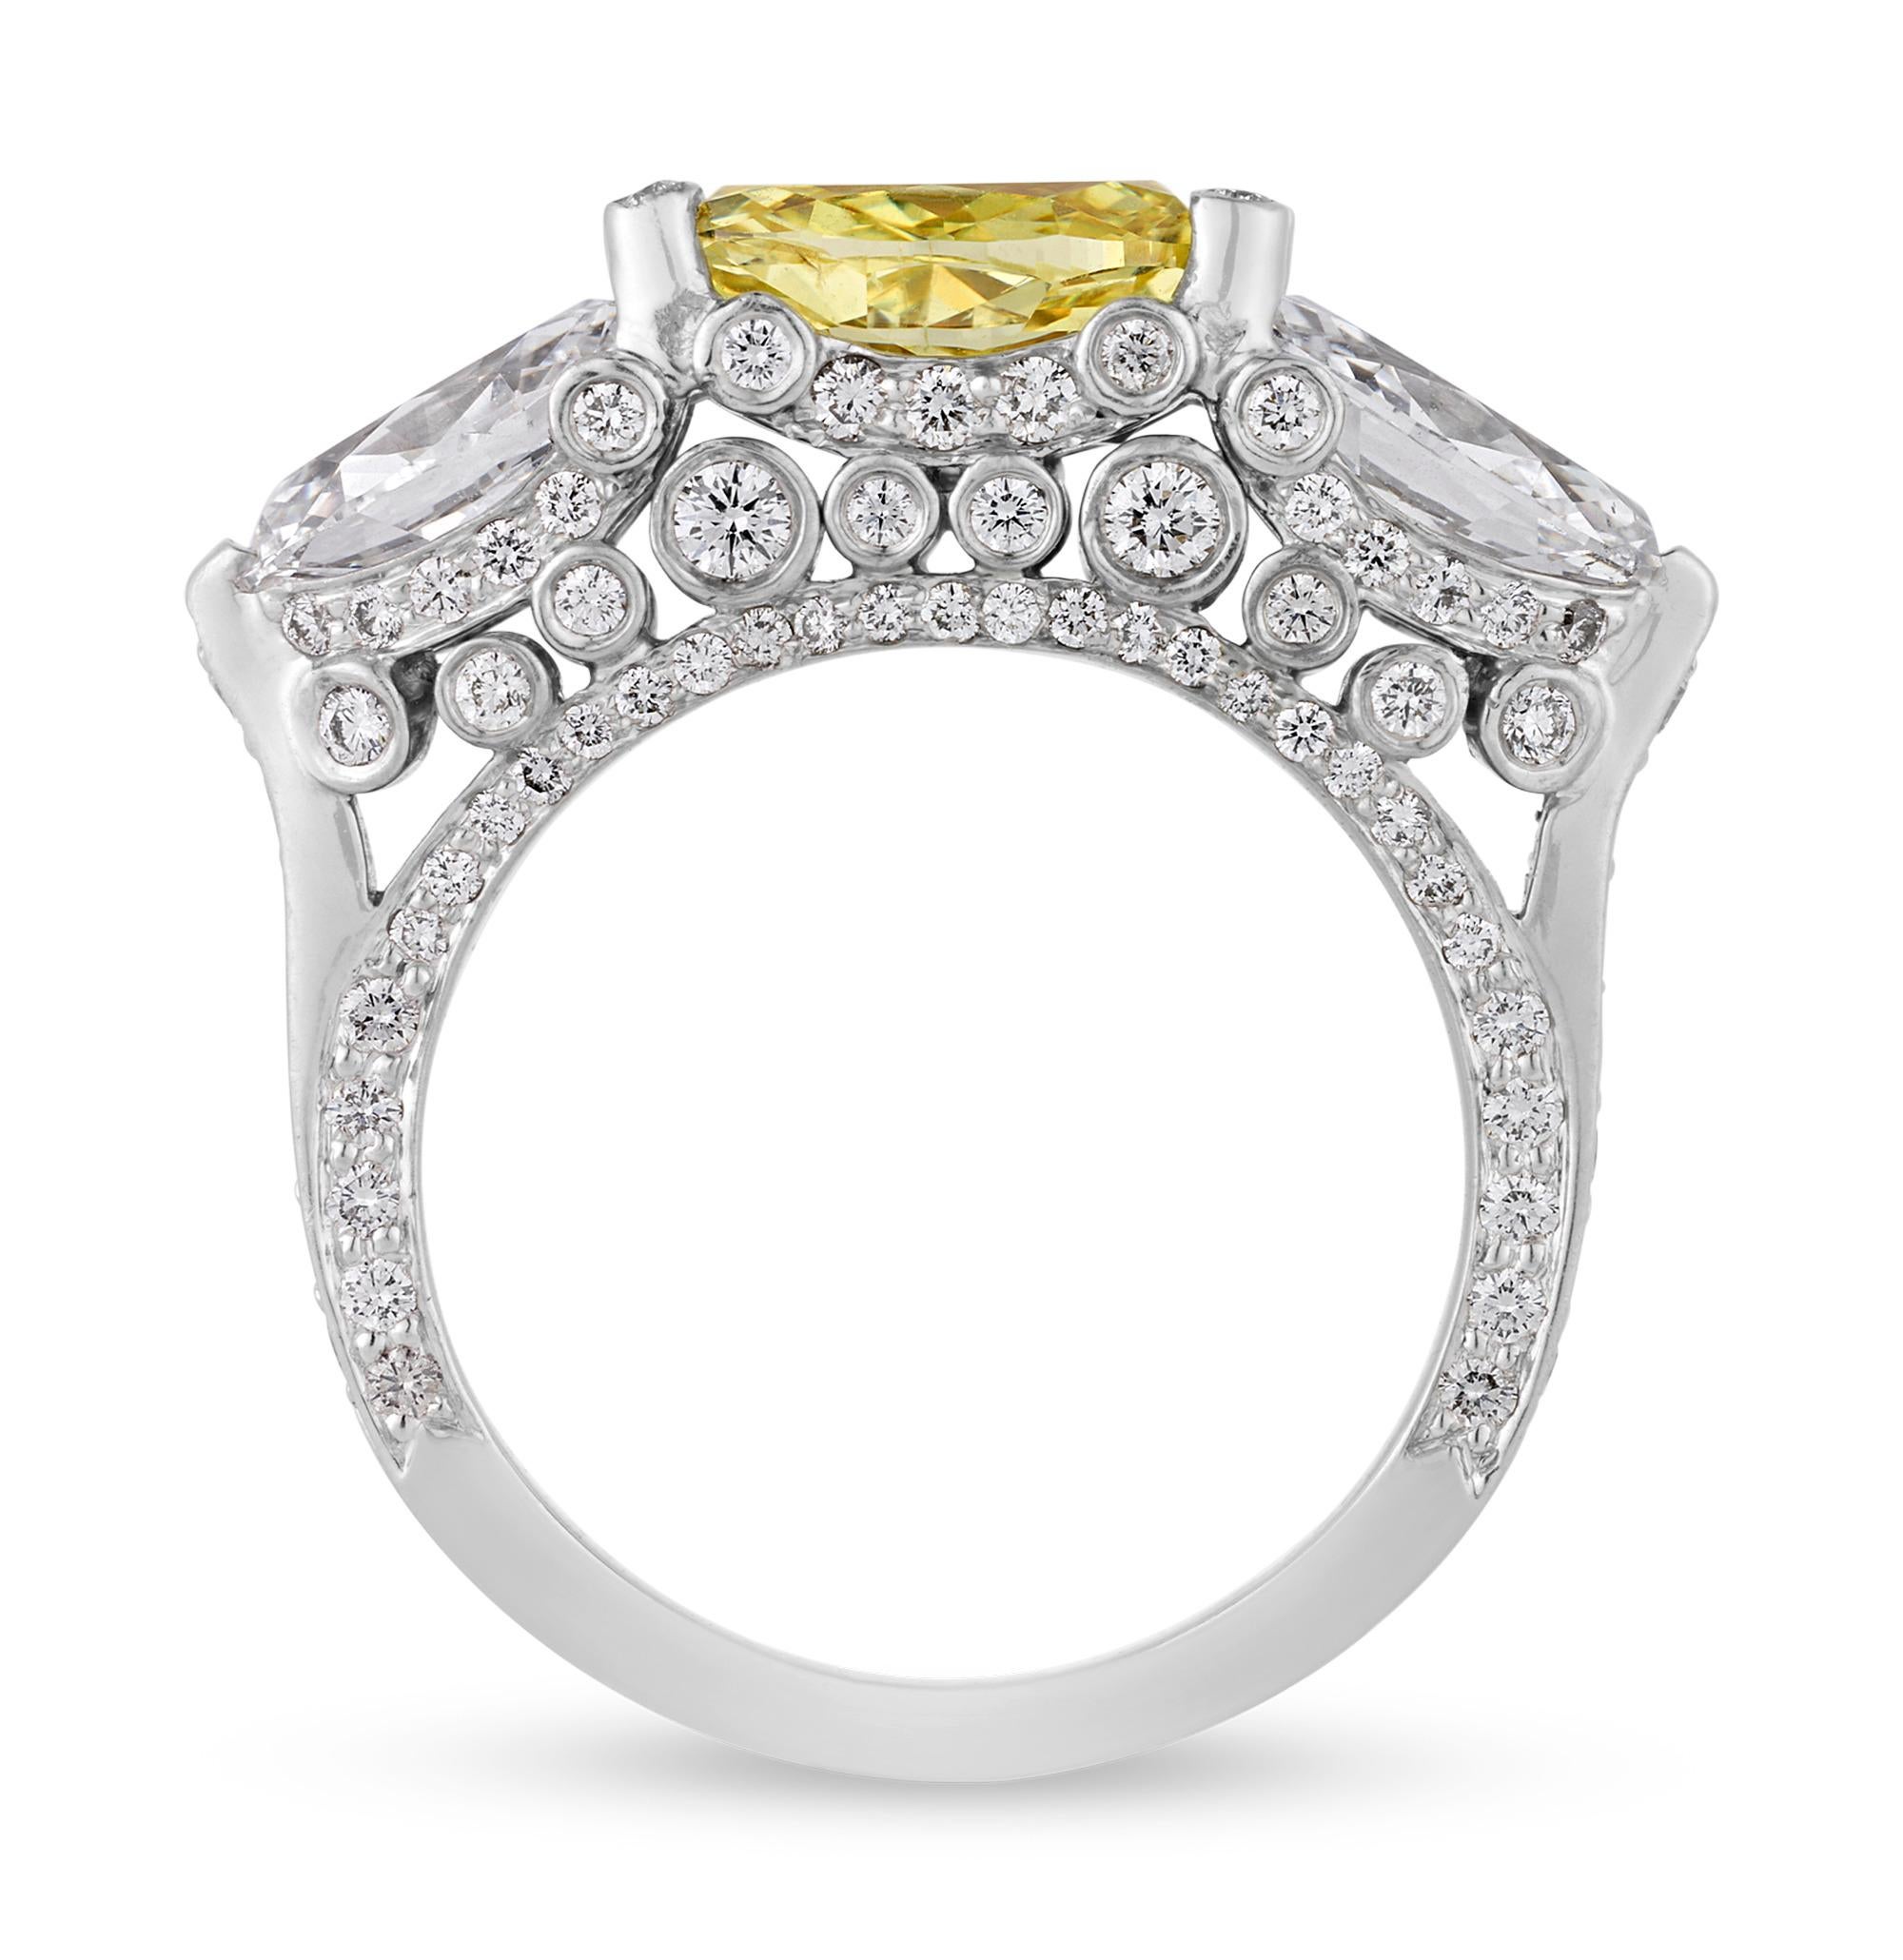 This exquisite fancy yellow diamond ring perfectly embodies sophistication and timeless elegance. At its heart lies a breathtaking GIA-certified fancy yellow oval-cut diamond, weighing 1.81 carats. The yellow diamond is certified by the Gemological